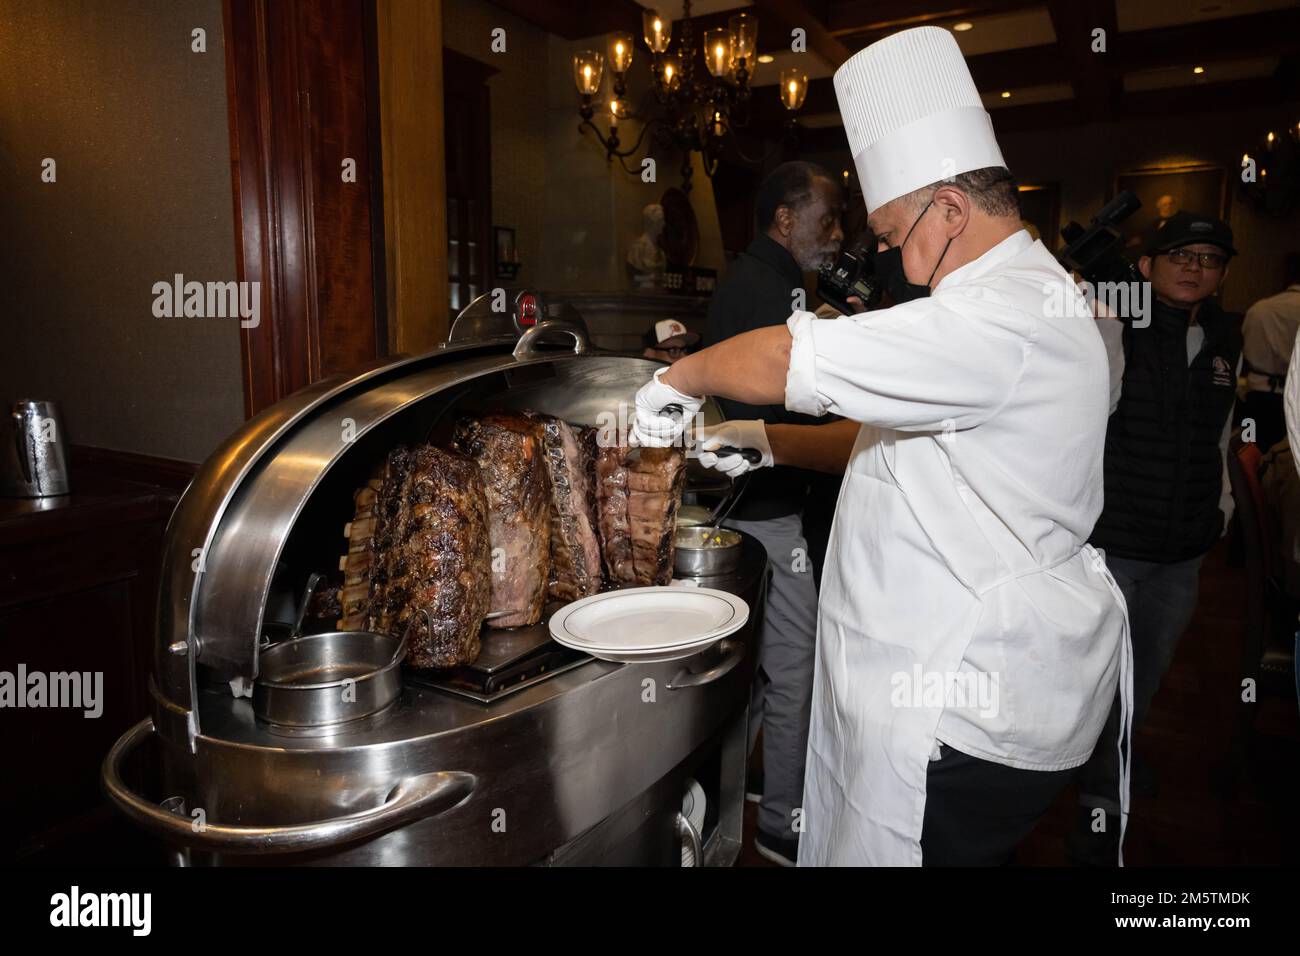 A cook at the 2022 Lawry’s Beef Bowl, Thursday, December 29, 2022, at Lawry’s The Prime Rib, in Los Angeles, CA. (Ed Ruvalcaba/Image of Sport) Stock Photo